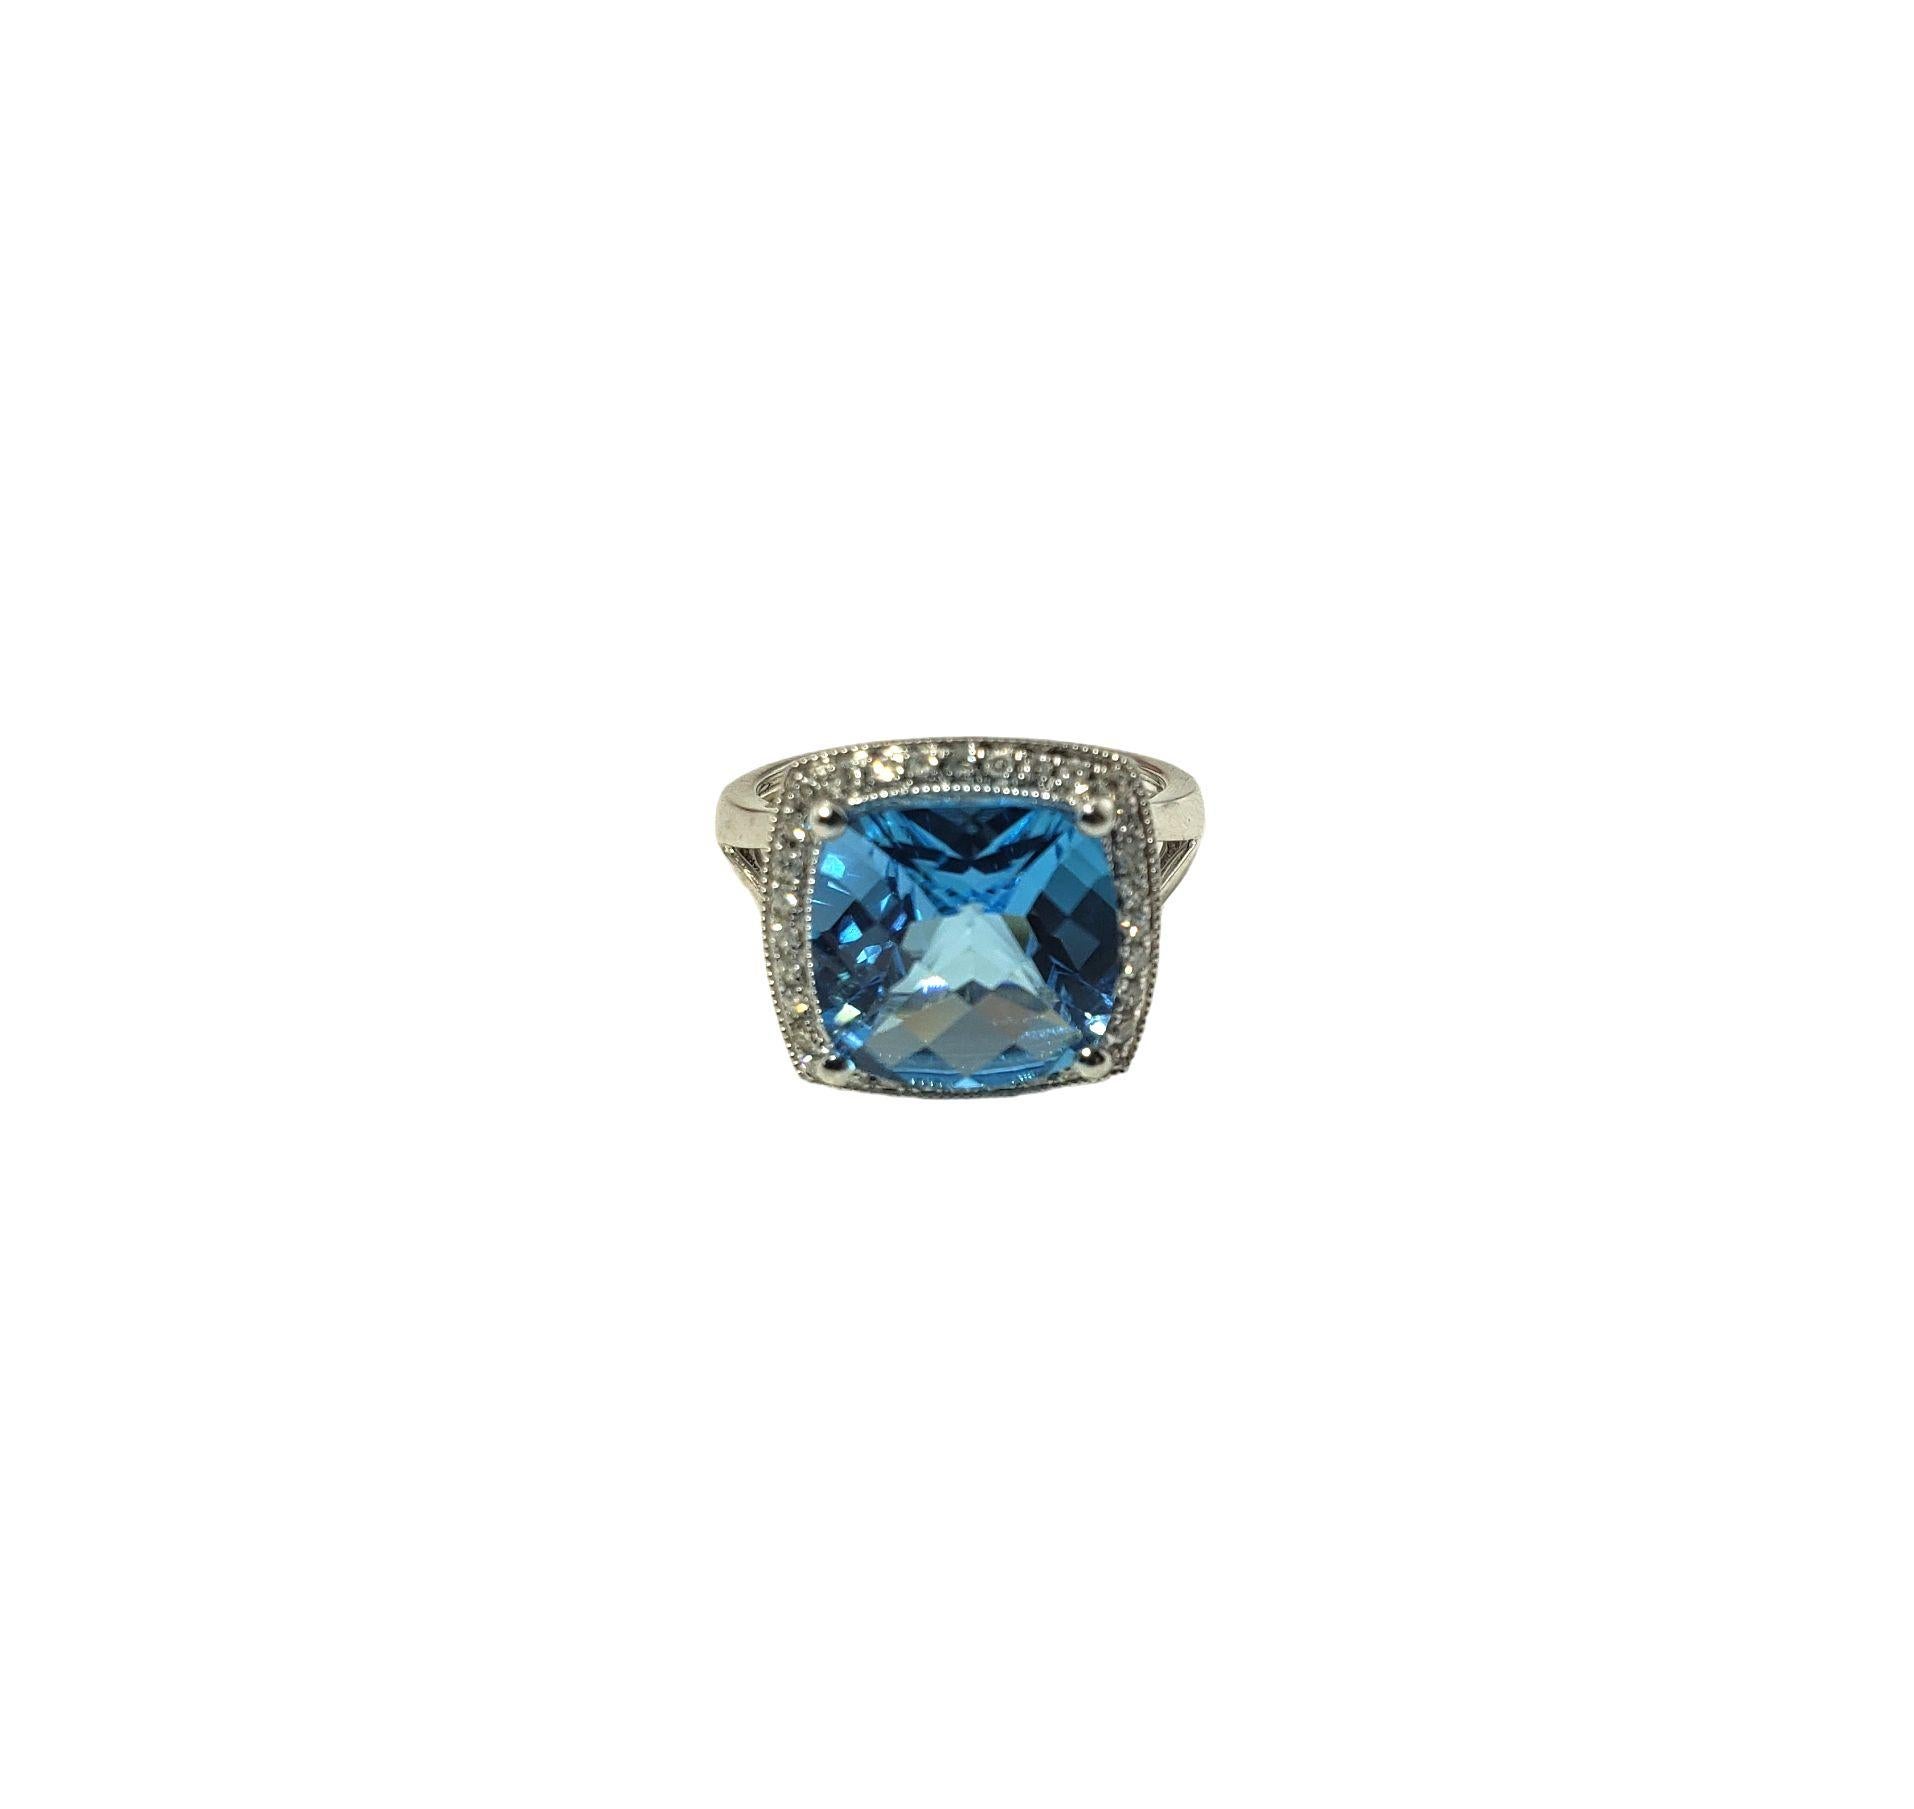 Vintage 10 Karat Topaz and Diamond Ring Size 5.75-

This stunning ring features one cushion cut blue topaz (11 mm x 11 mm) and 32 round single cut diamonds set in classic 10K white gold. Width: 14 mm. Shank: 2 mm.

Topaz weight: 7.18 ct.

Total